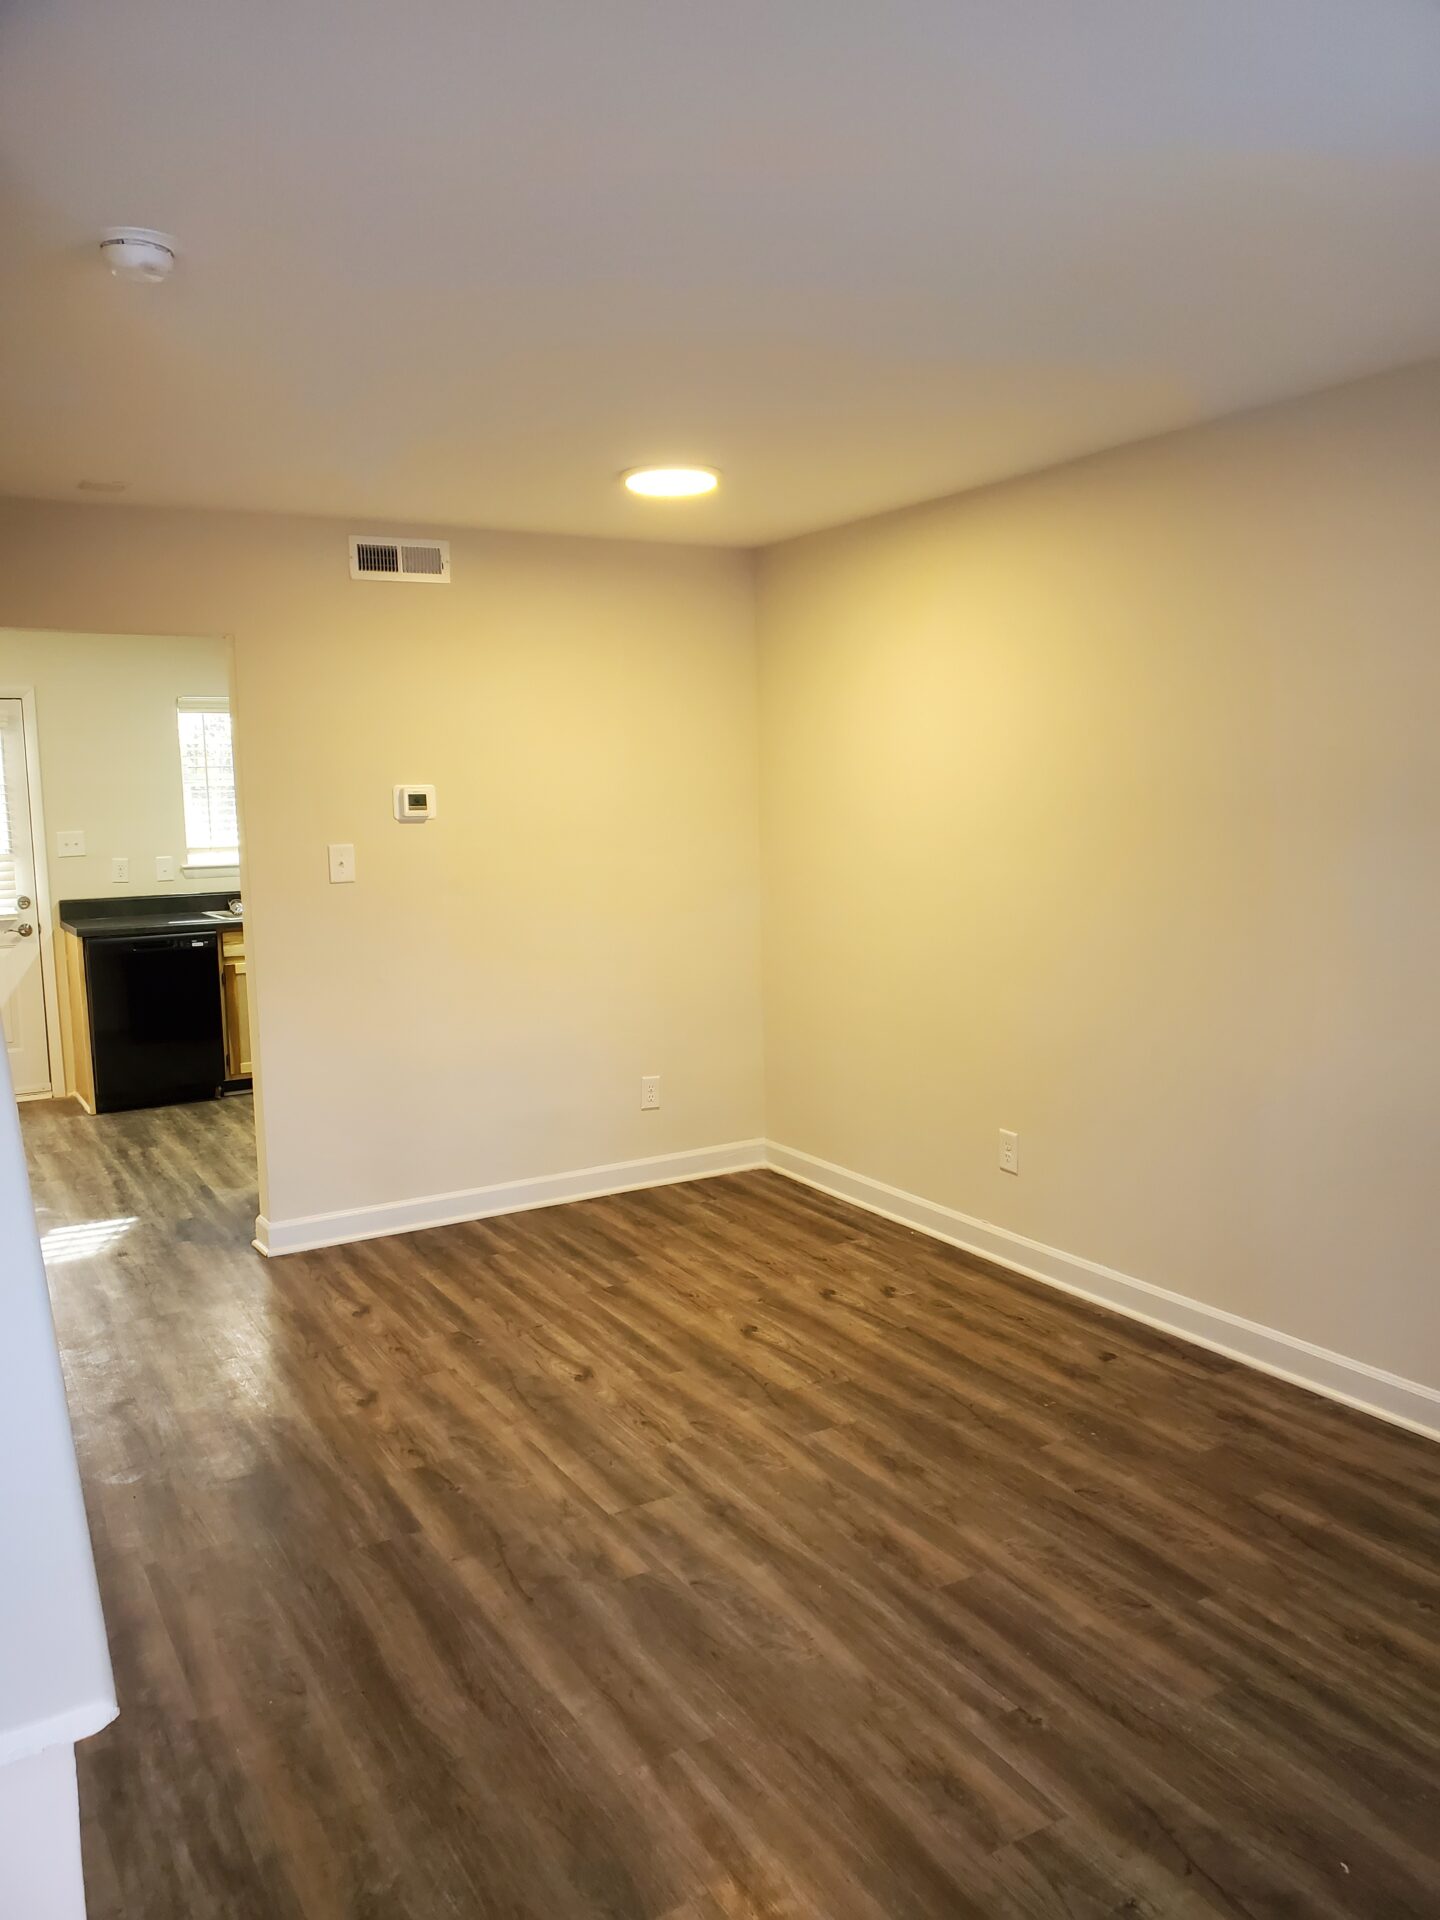 An Empty Room With Wood Flooring and White Walls